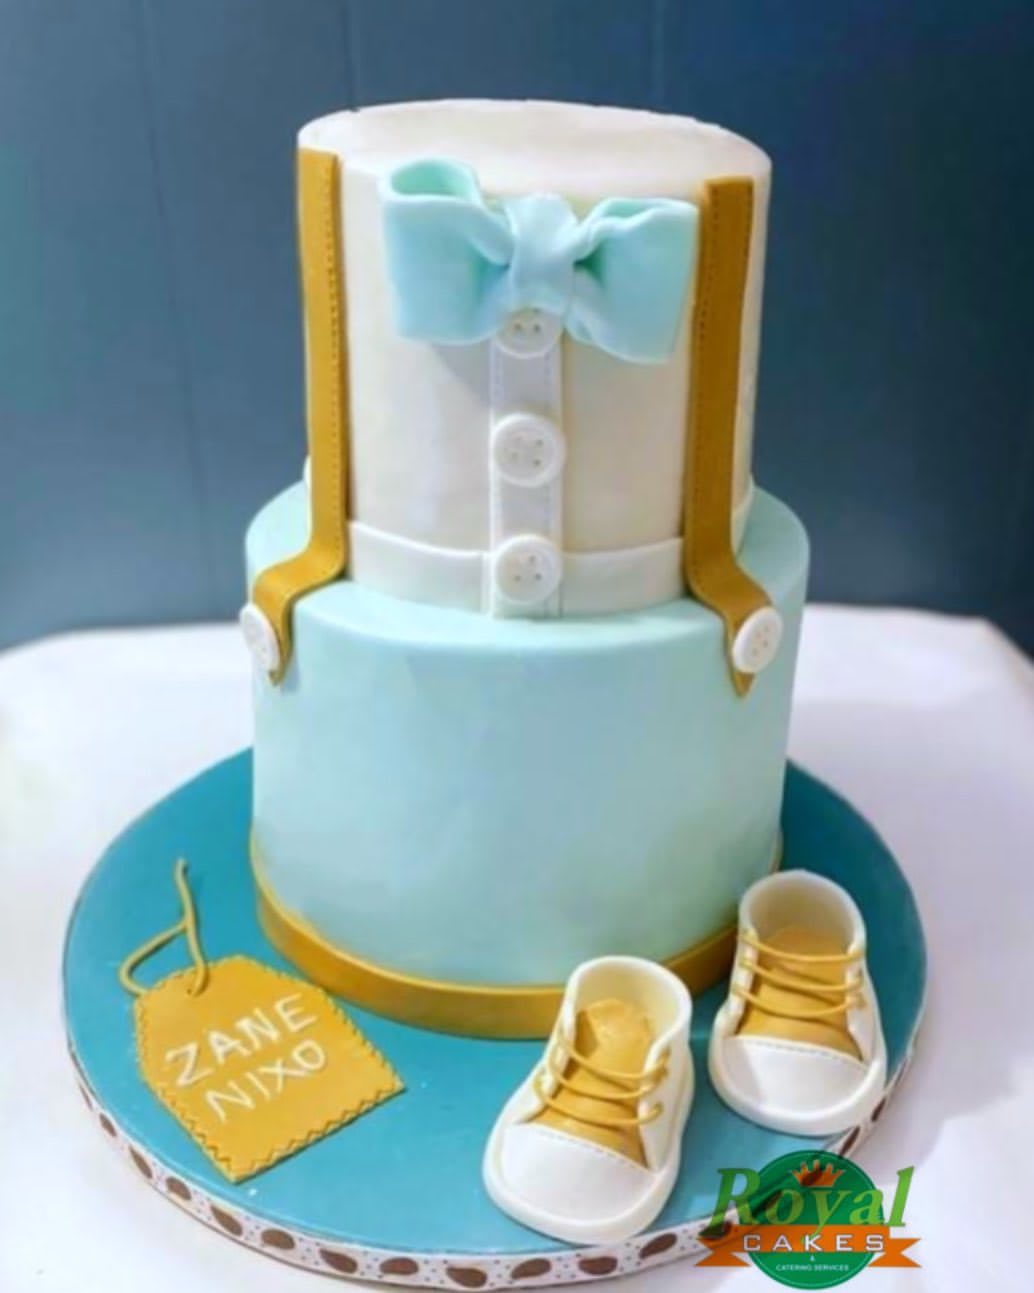 Louis Vuitton & Mercedes Themed Birthday Cake for Husband